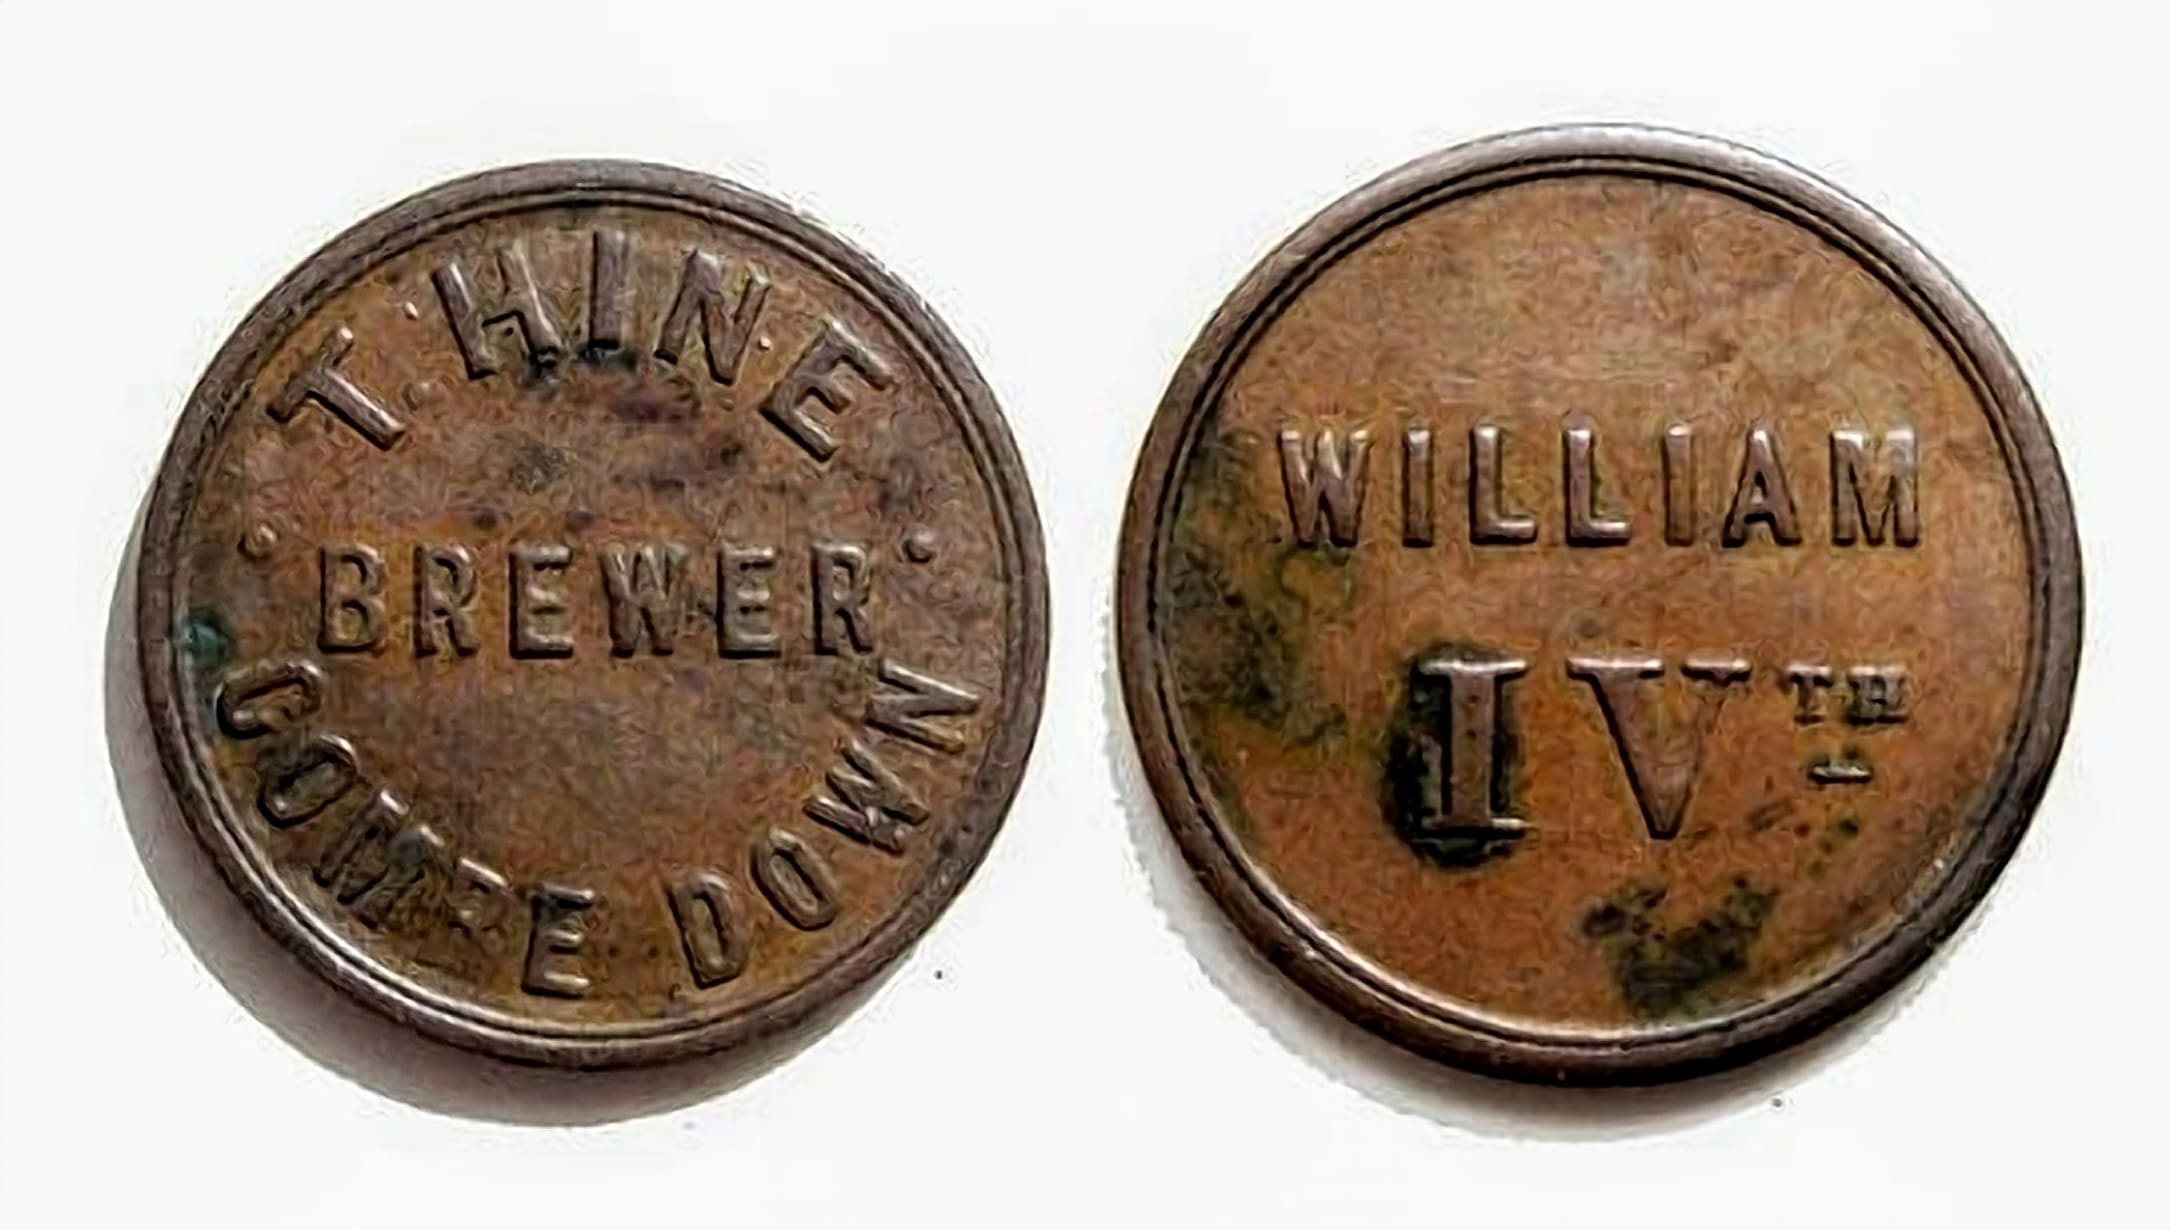 King William IV tokens